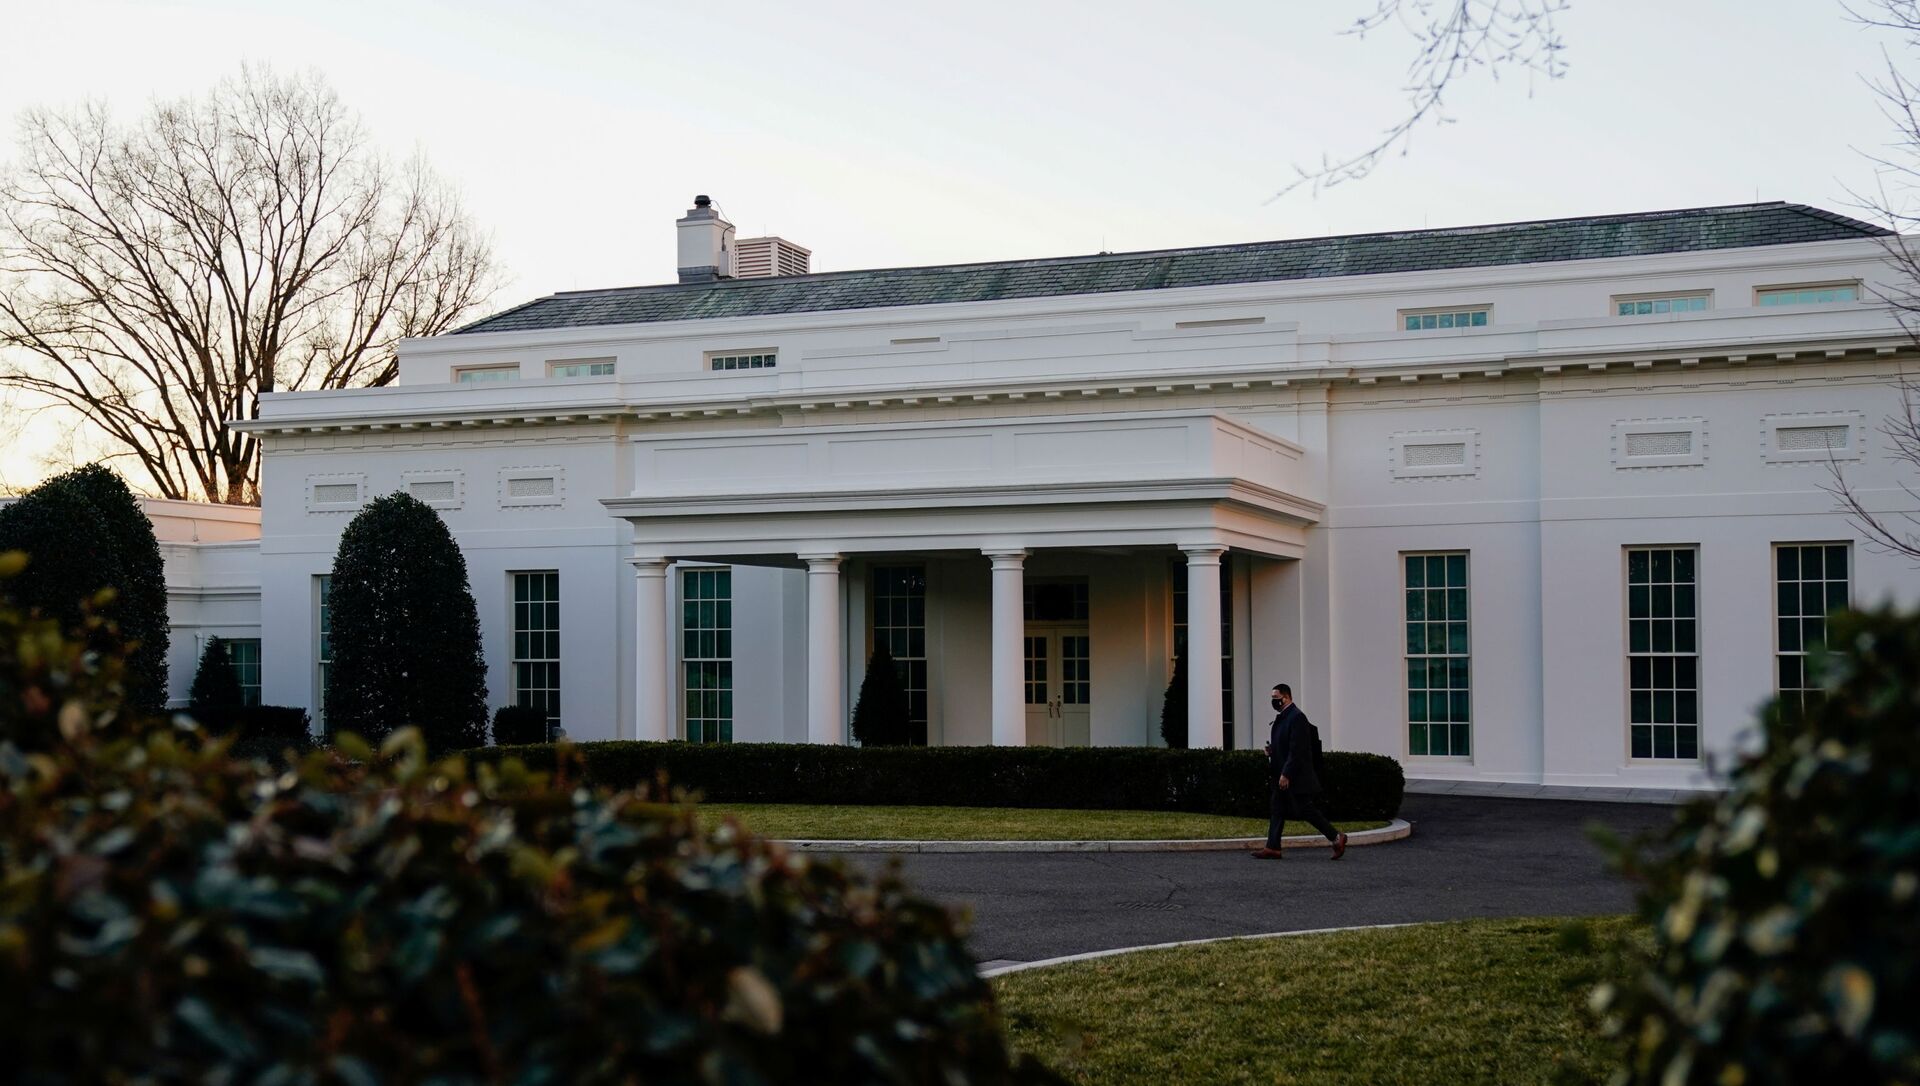 The West Wing of the White House is seen at sunrise during US President Joe Biden's first week in office in Washington, 24 January 2021 - Sputnik International, 1920, 23.02.2021